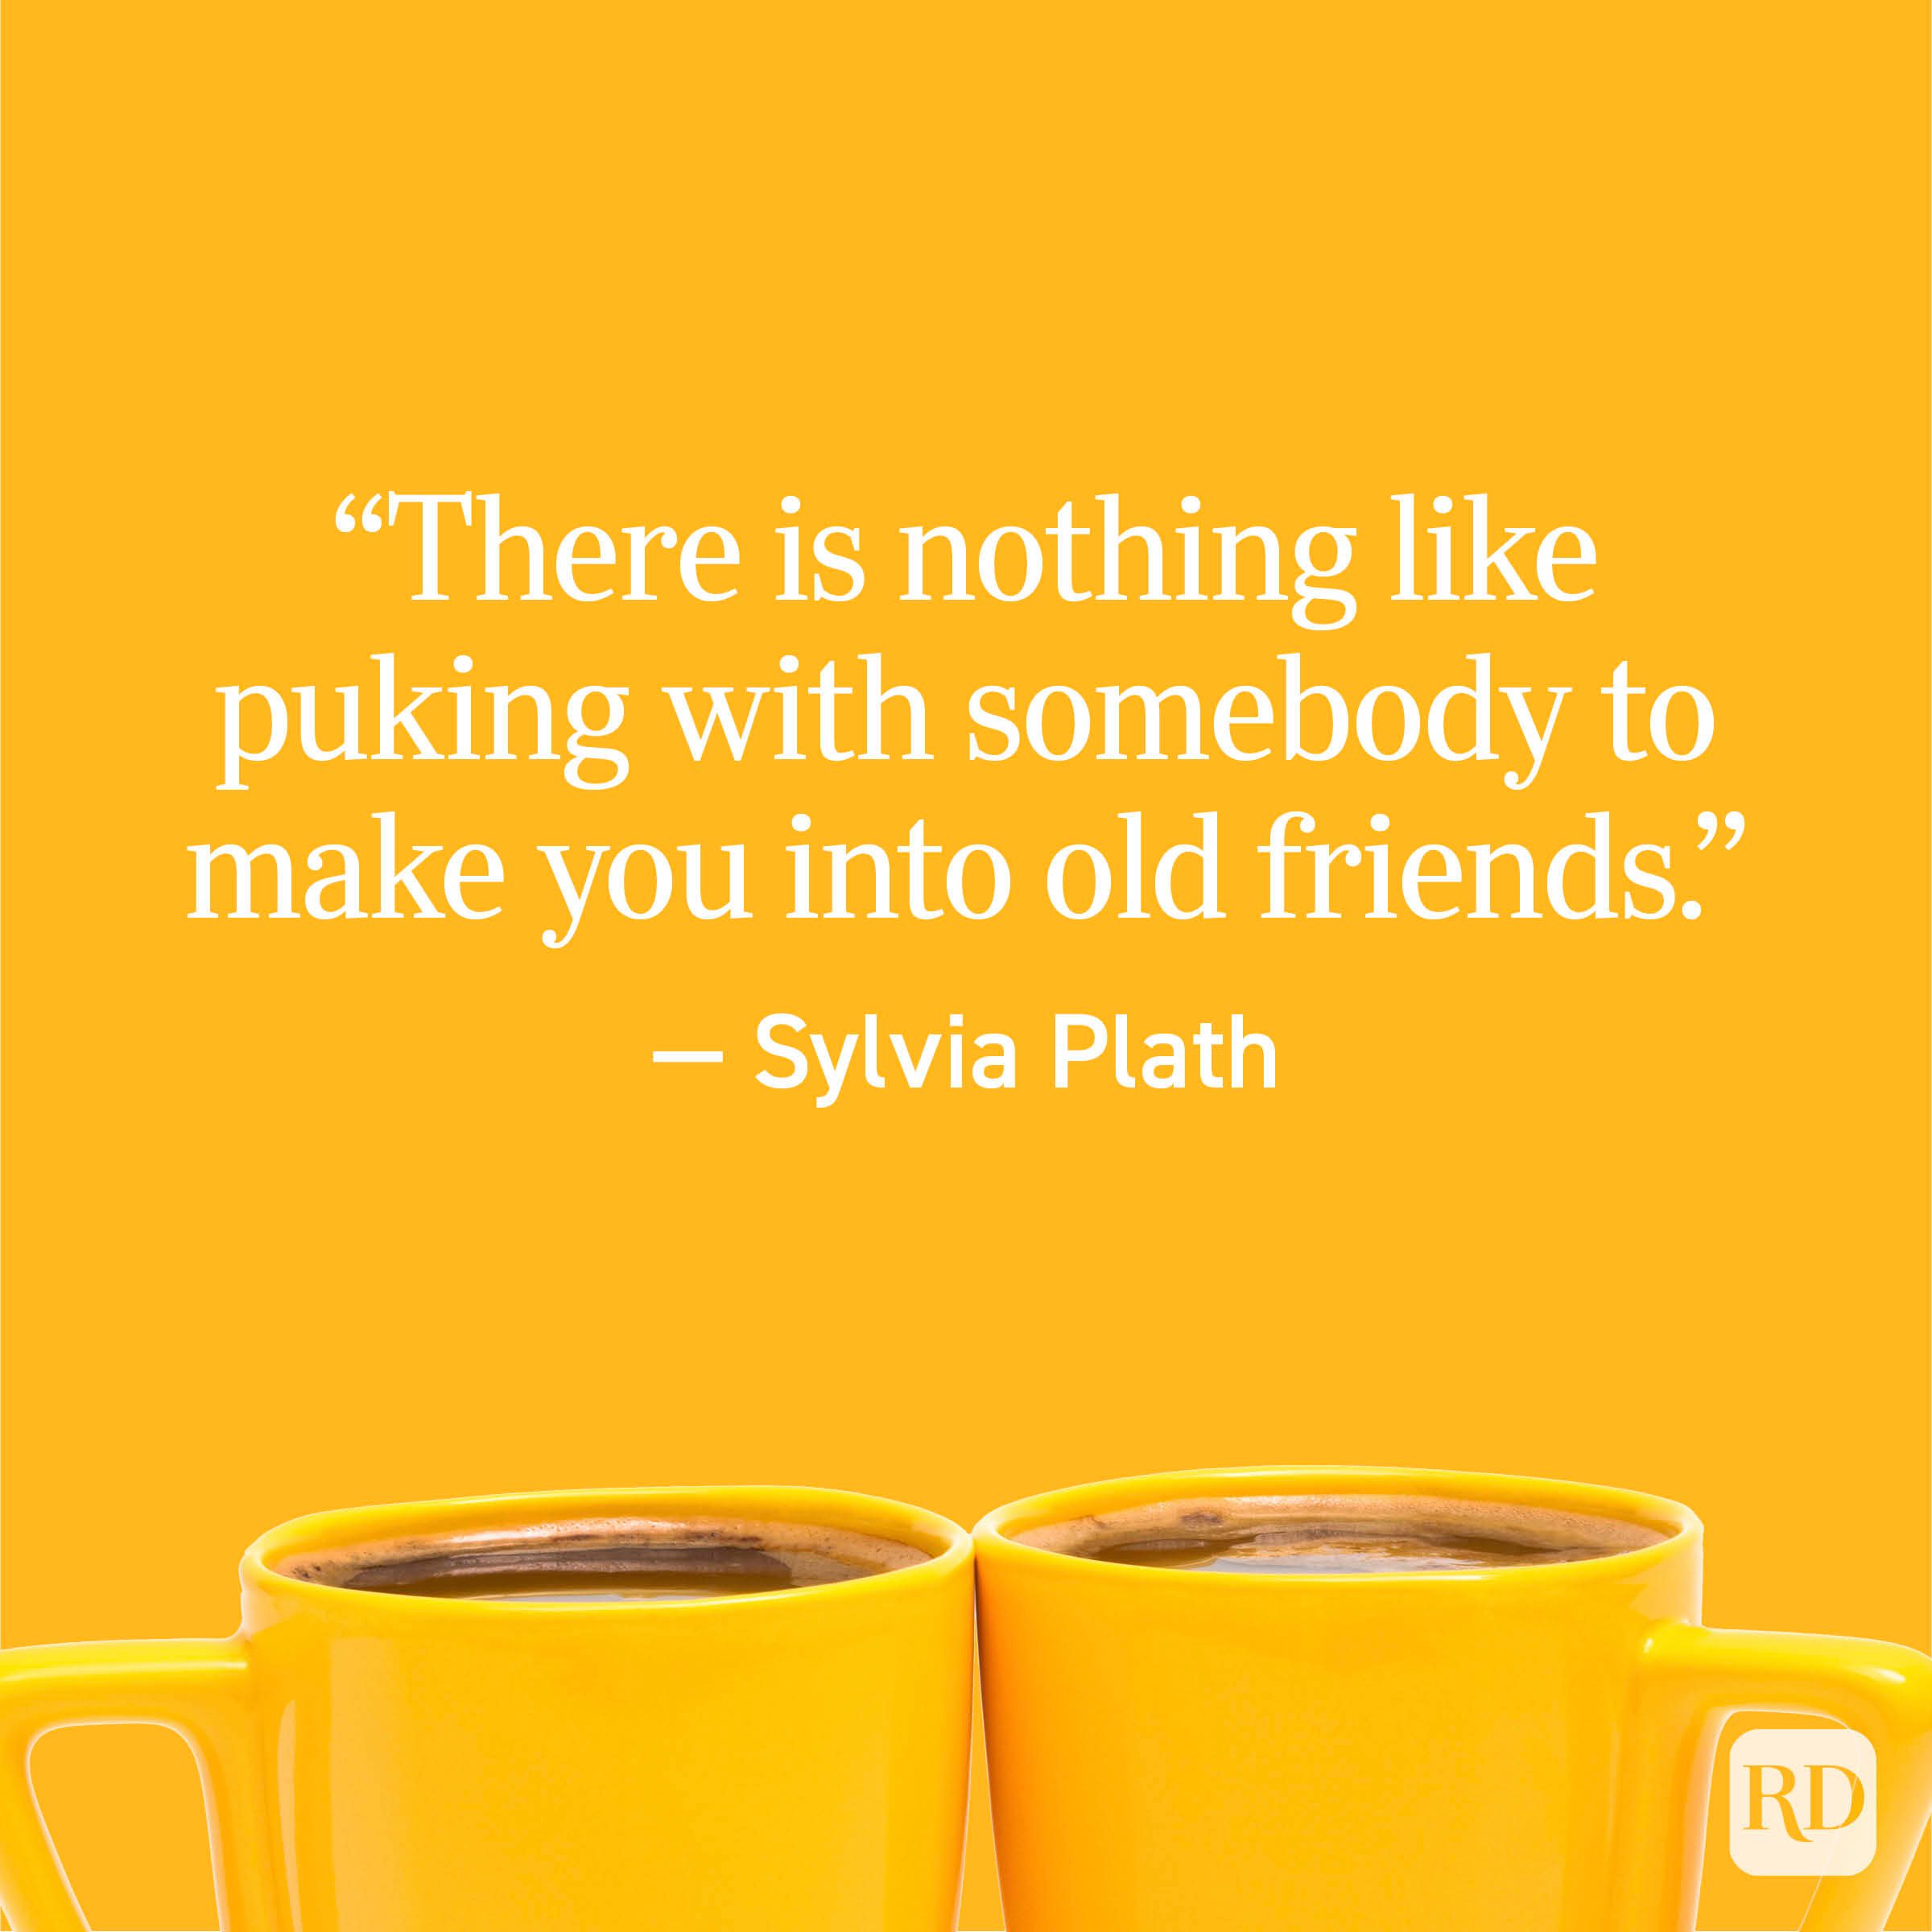 “There is nothing like puking with somebody to make you into old friends.” — Sylvia Plath